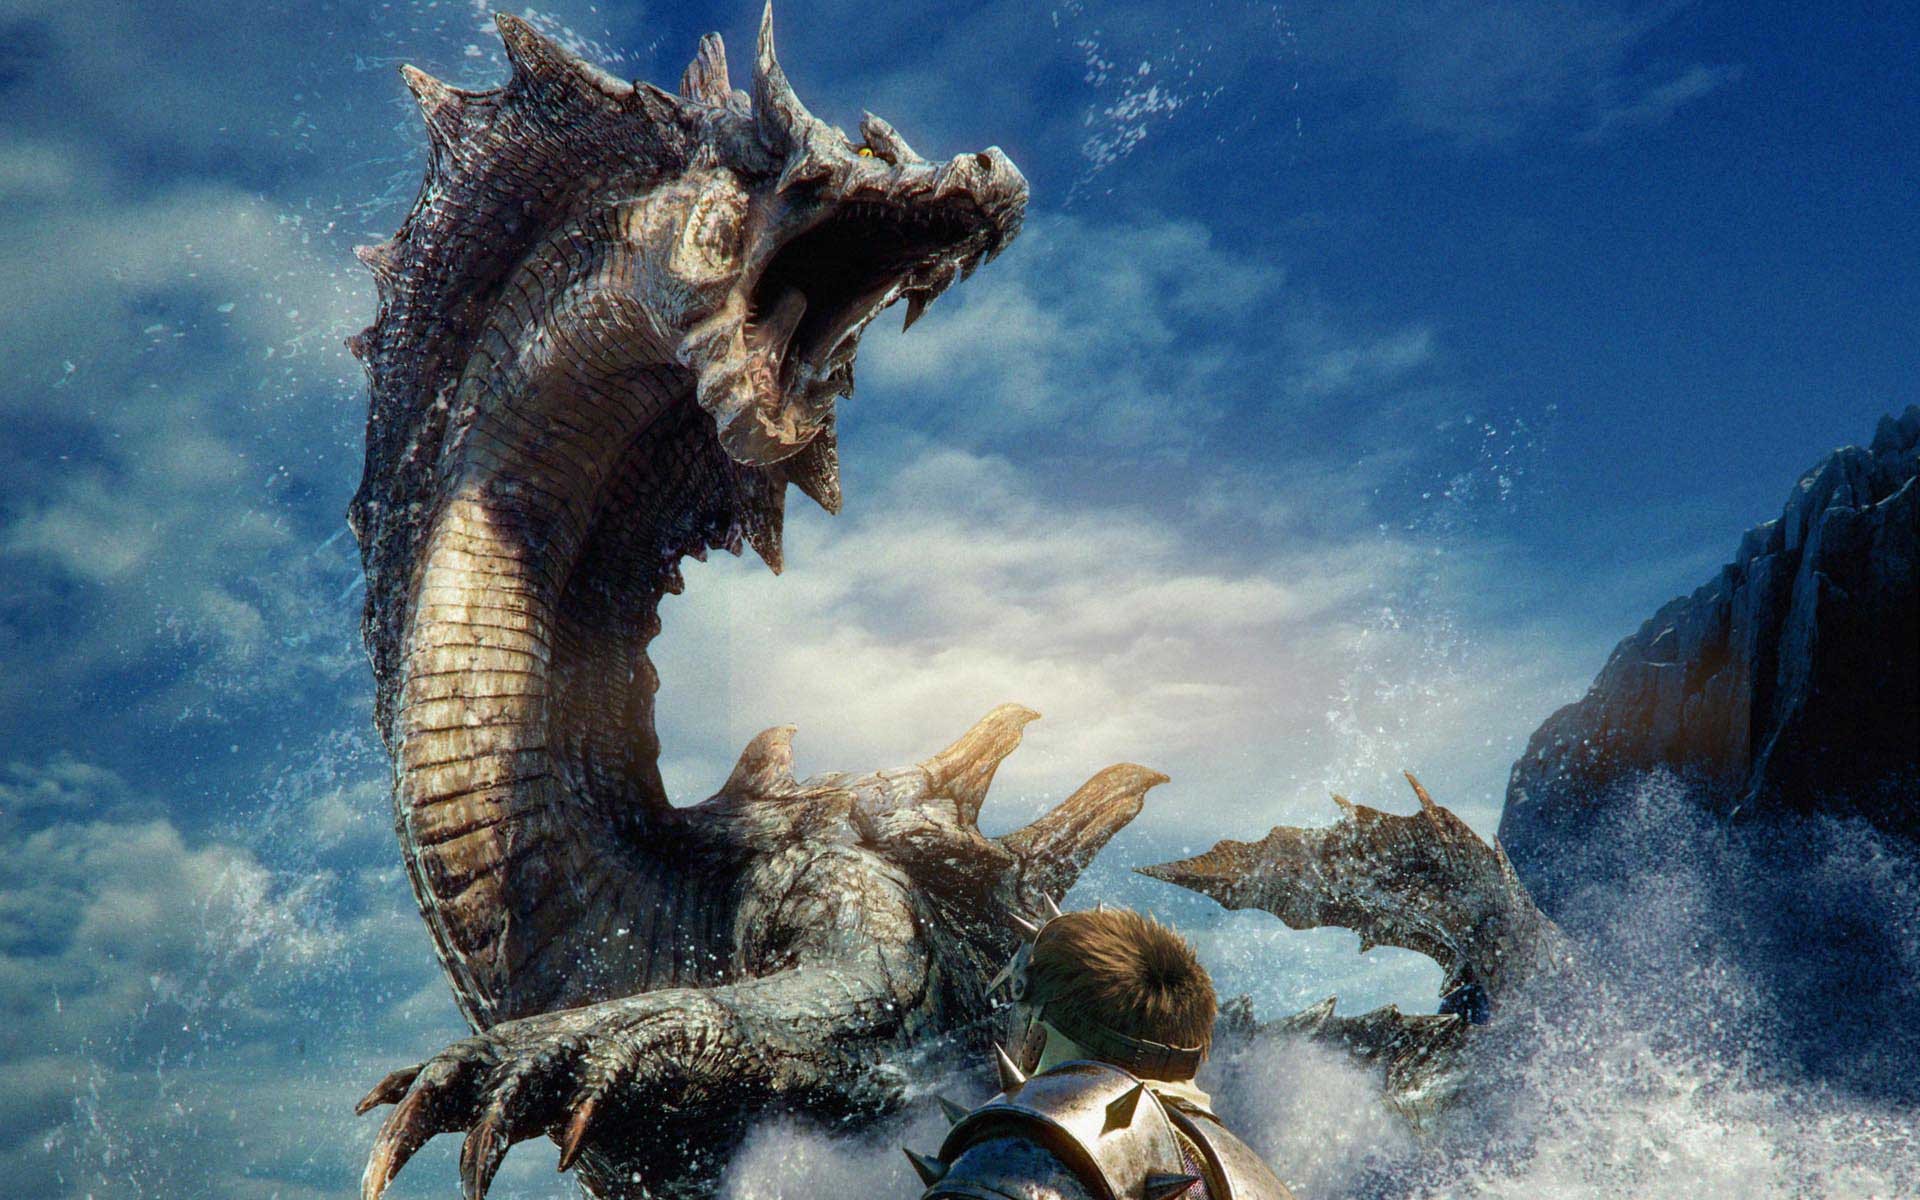 1920x1200 7 (25 Mind-Blowing Fantasy Dragon Wallpapers)